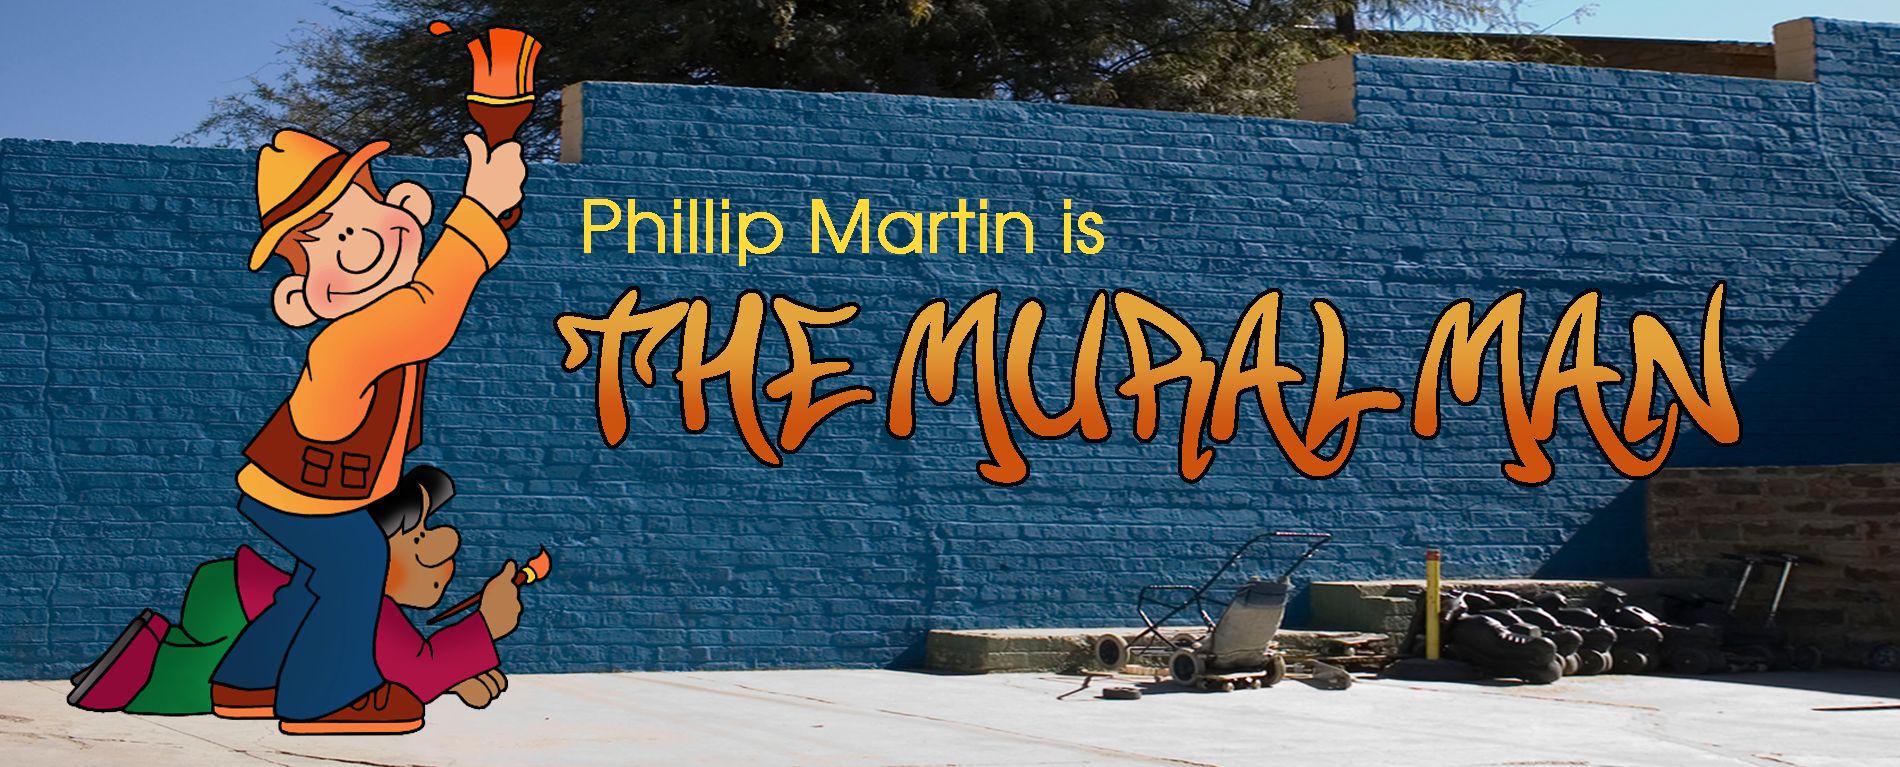 Phillip Martin is the Mural Man